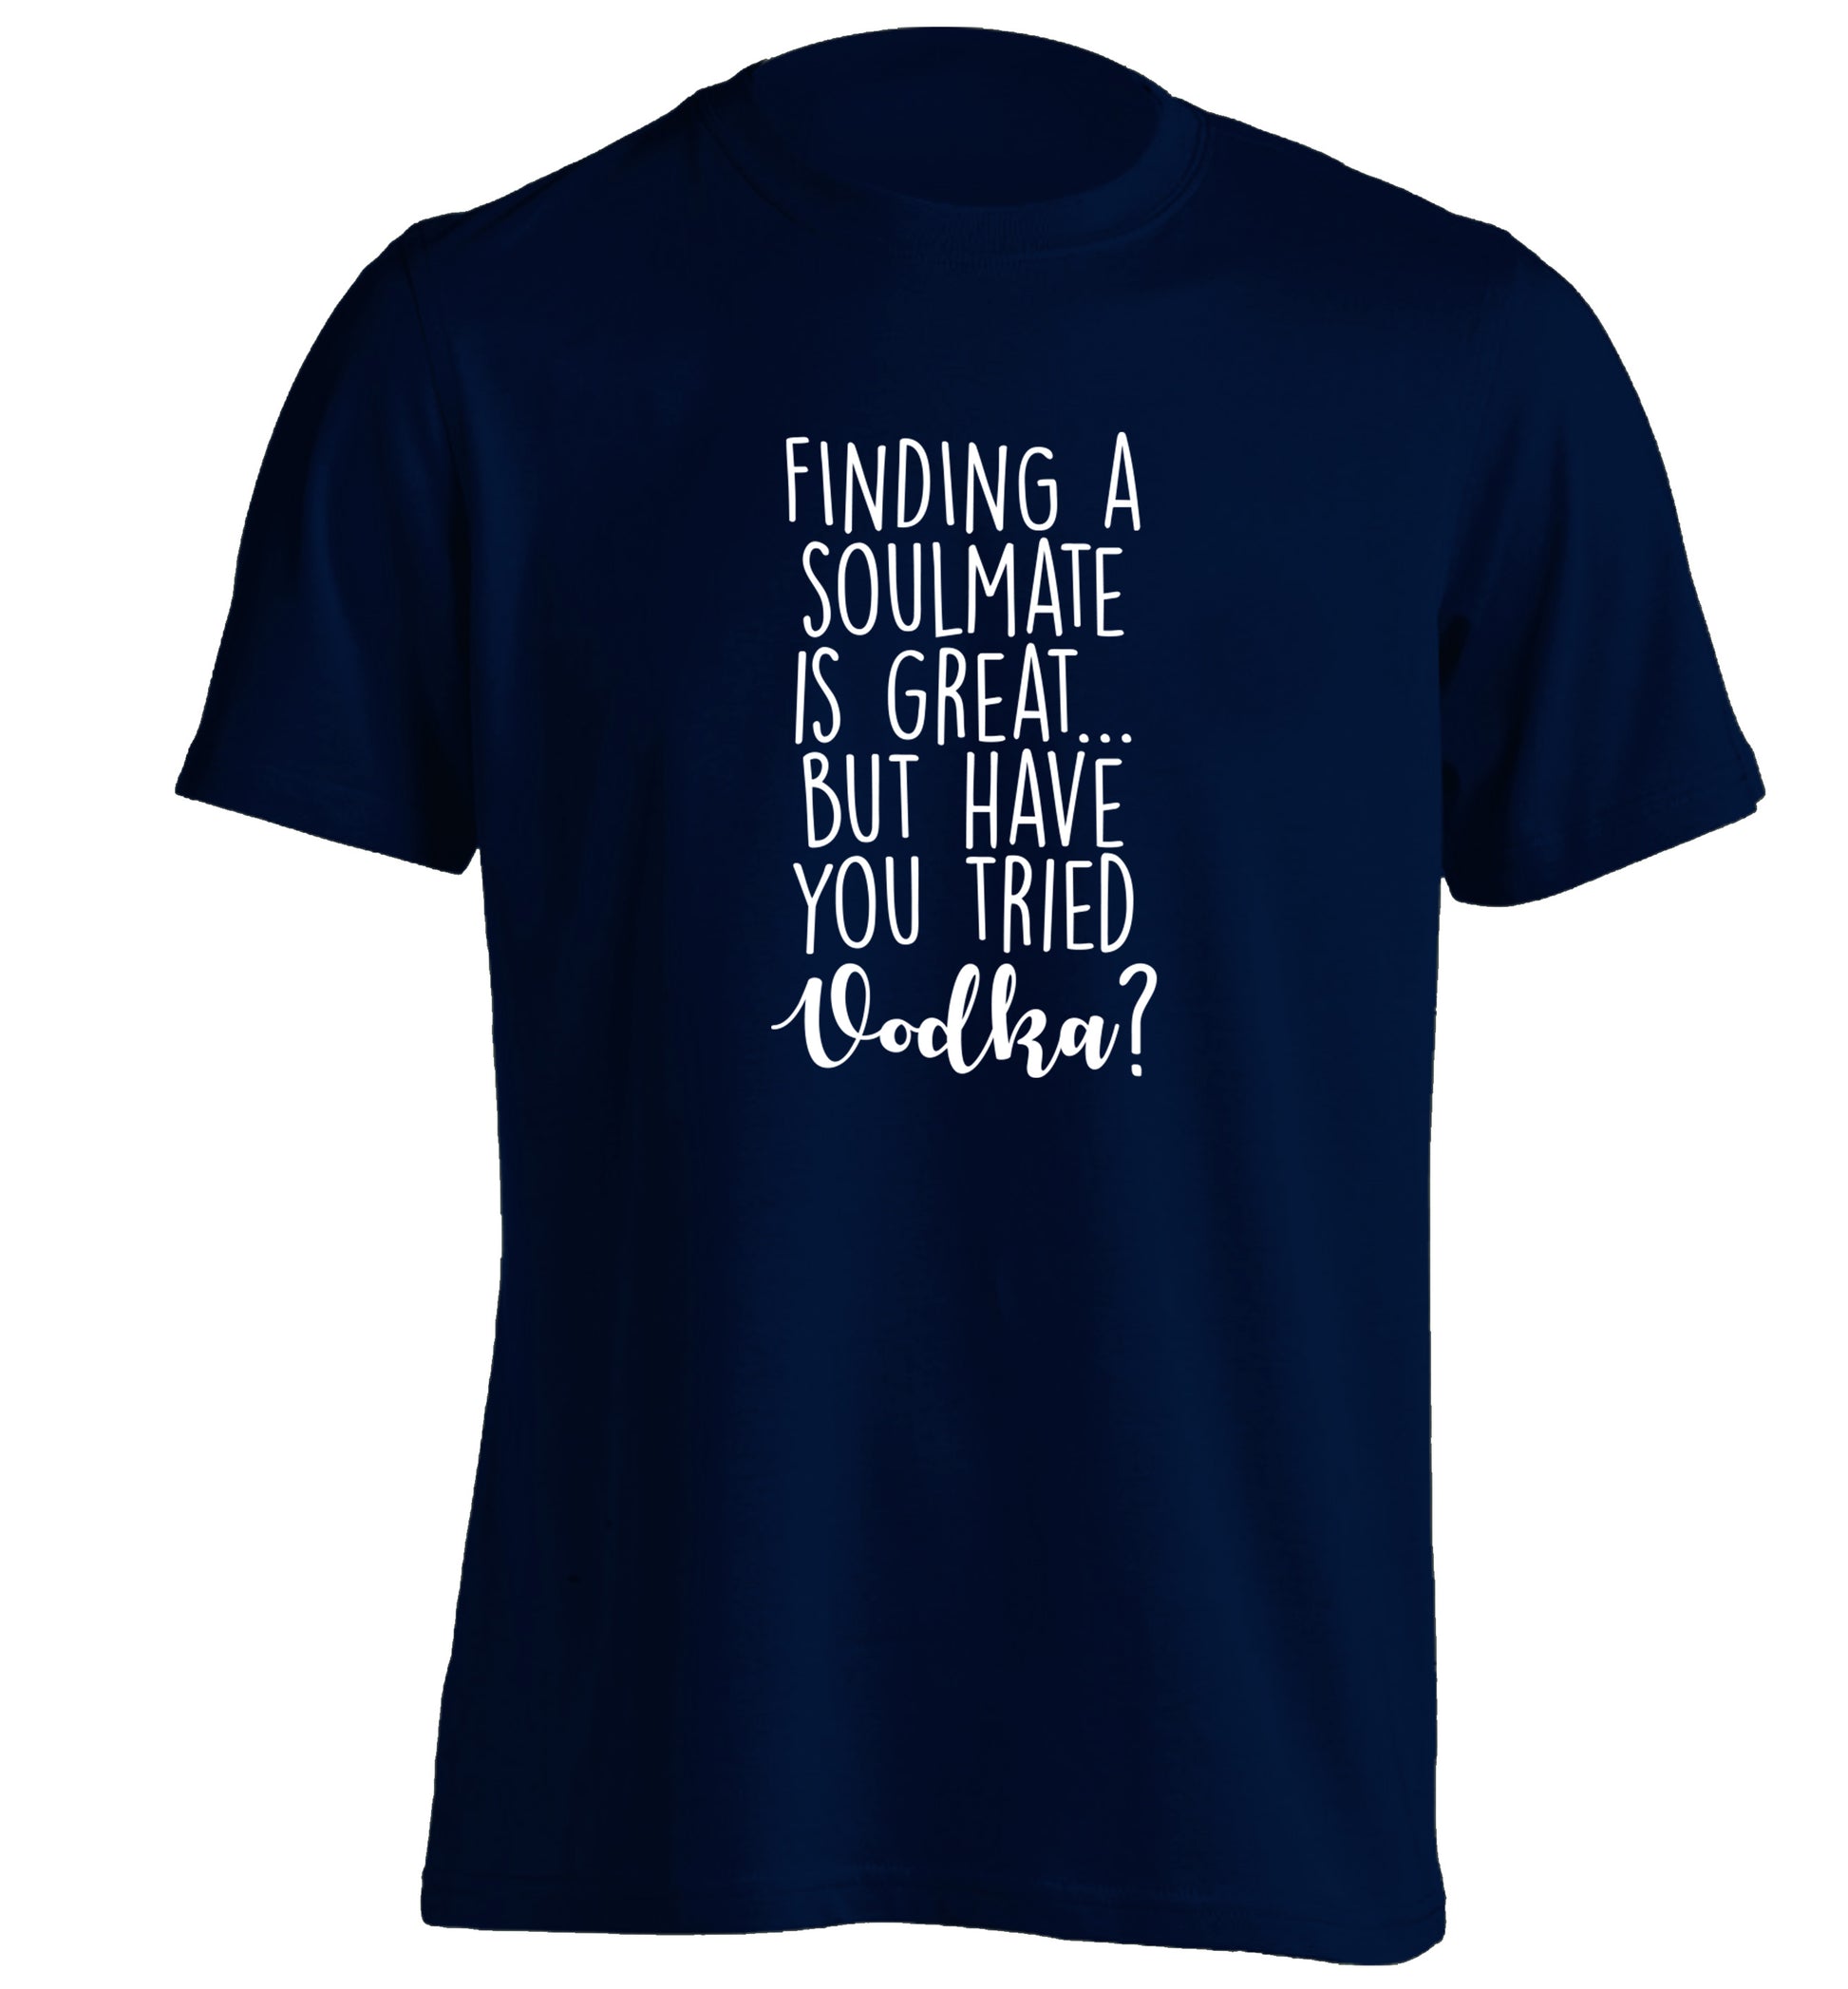 Finding a soulmate is great but have you tried vodka? adults unisex navy Tshirt 2XL